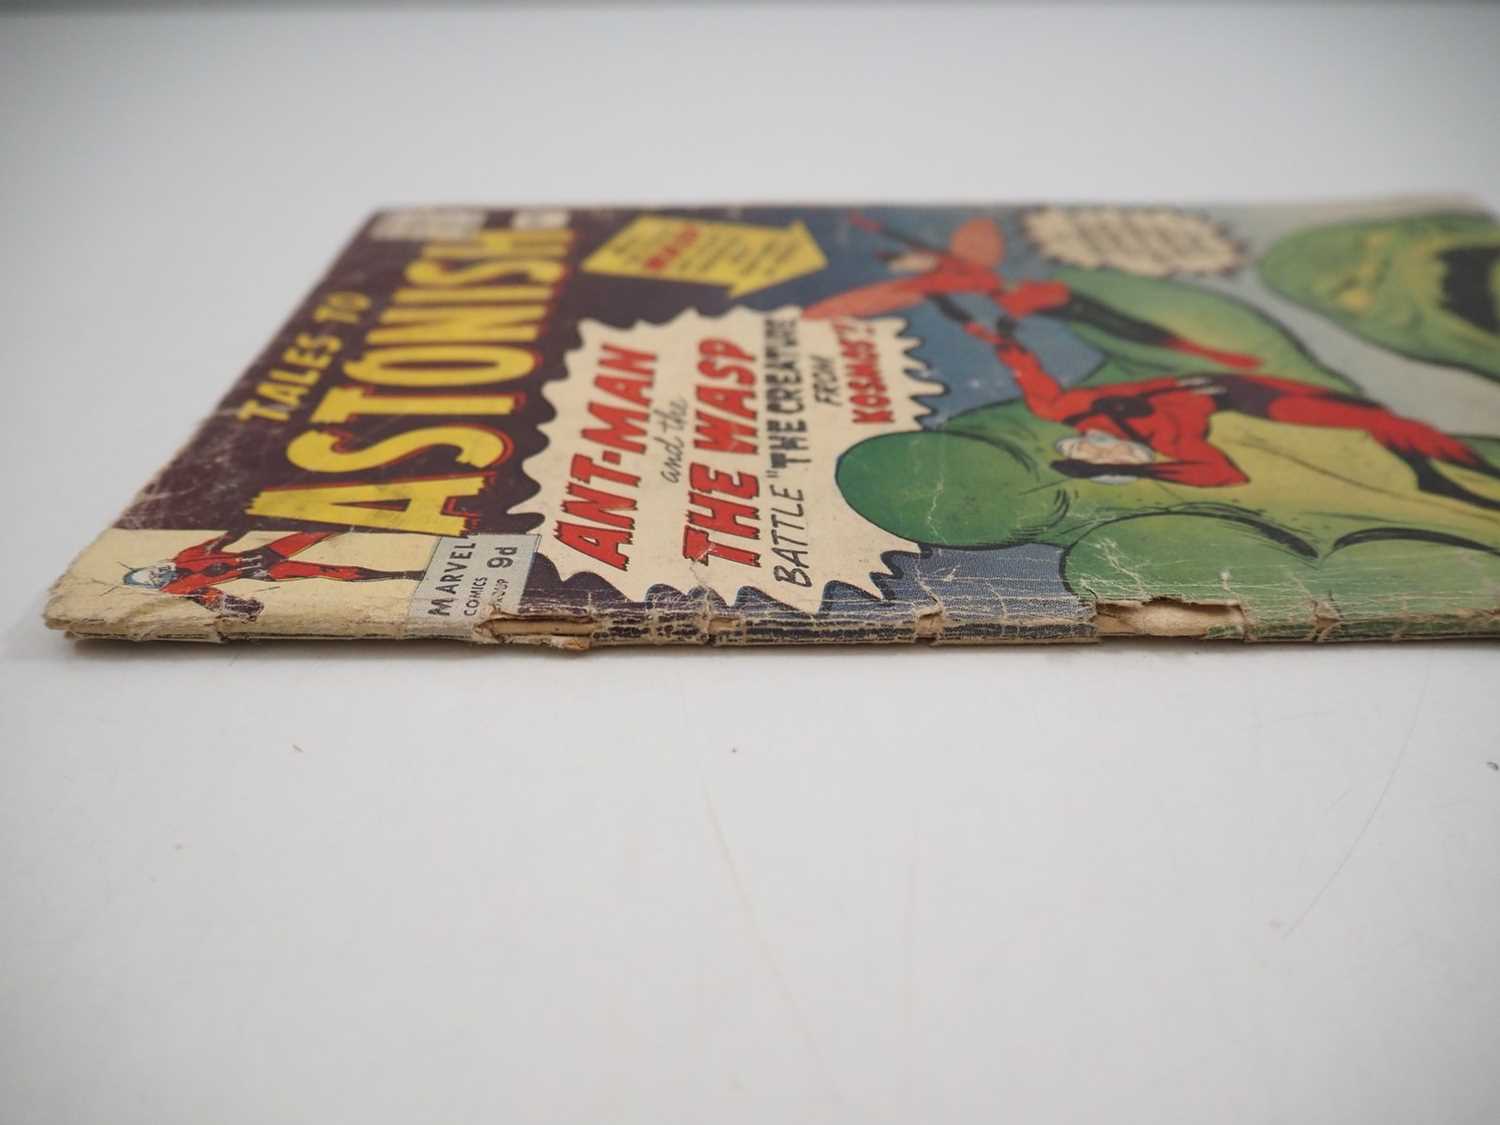 TALES TO ASTONISH #44 (1963 - MARVEL - UK Price Variant) - First appearance and origin of the Wasp - - Image 12 of 13